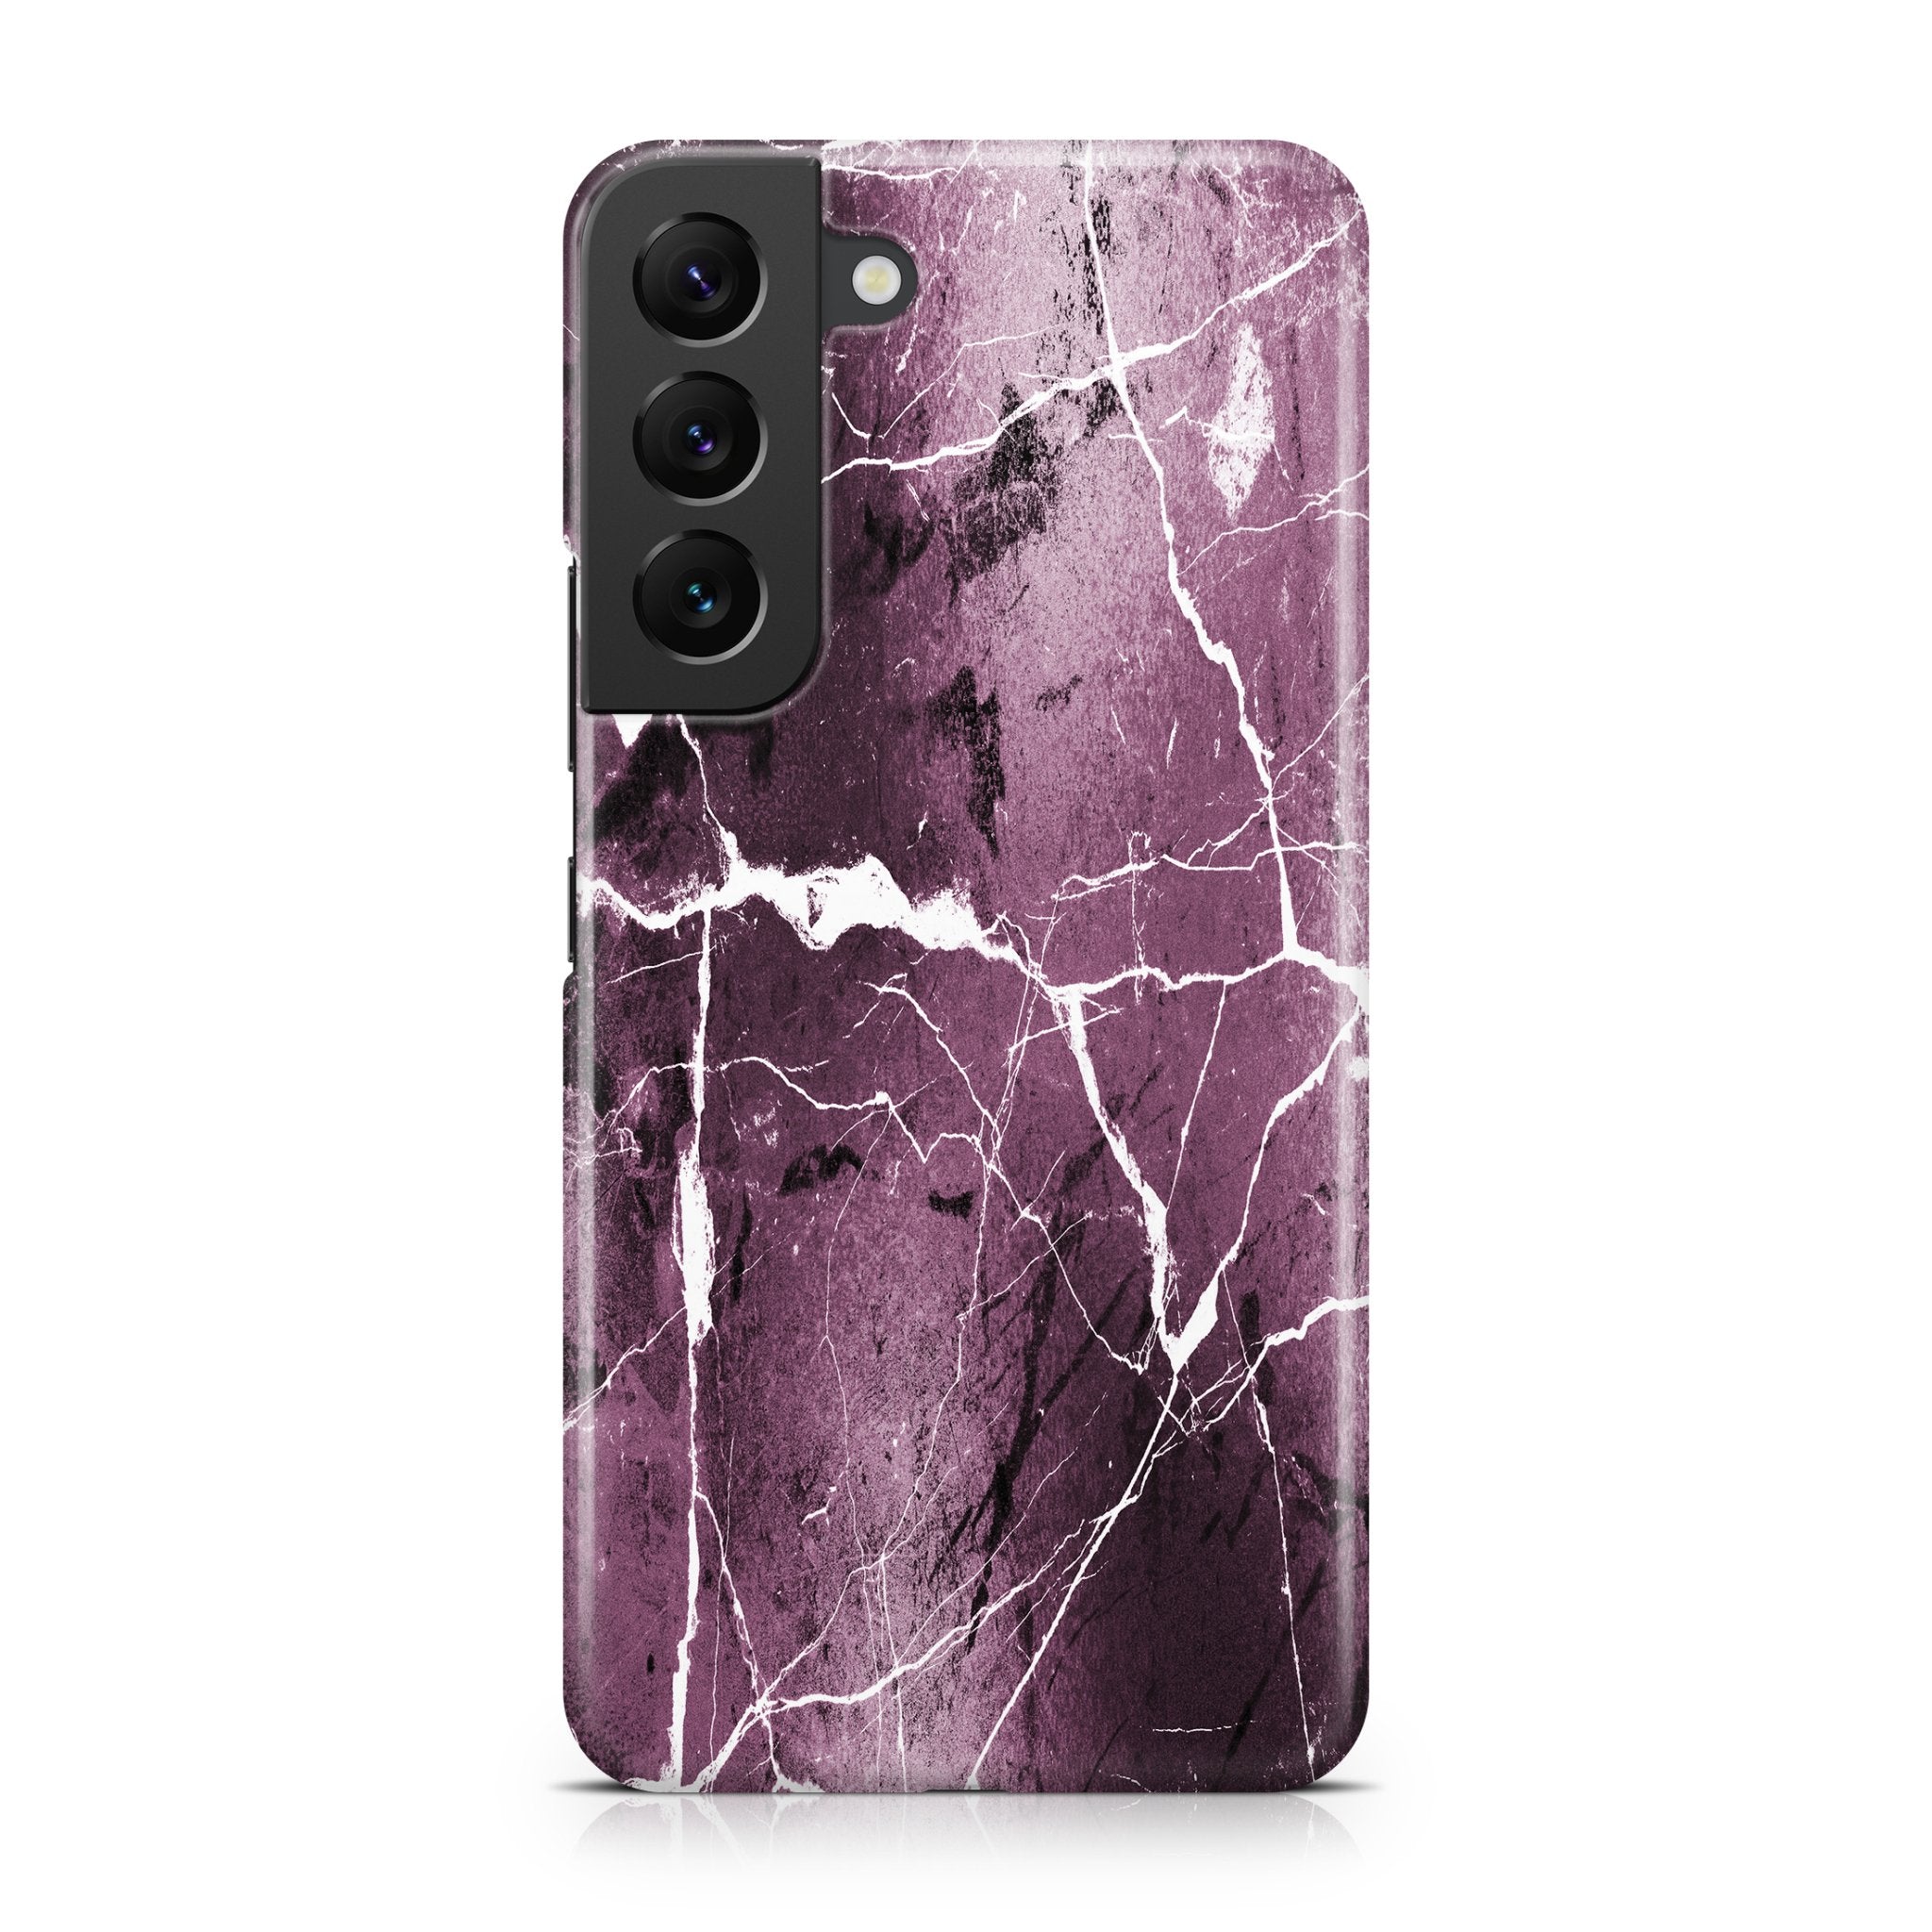 Dark Rose Marble - Samsung phone case designs by CaseSwagger